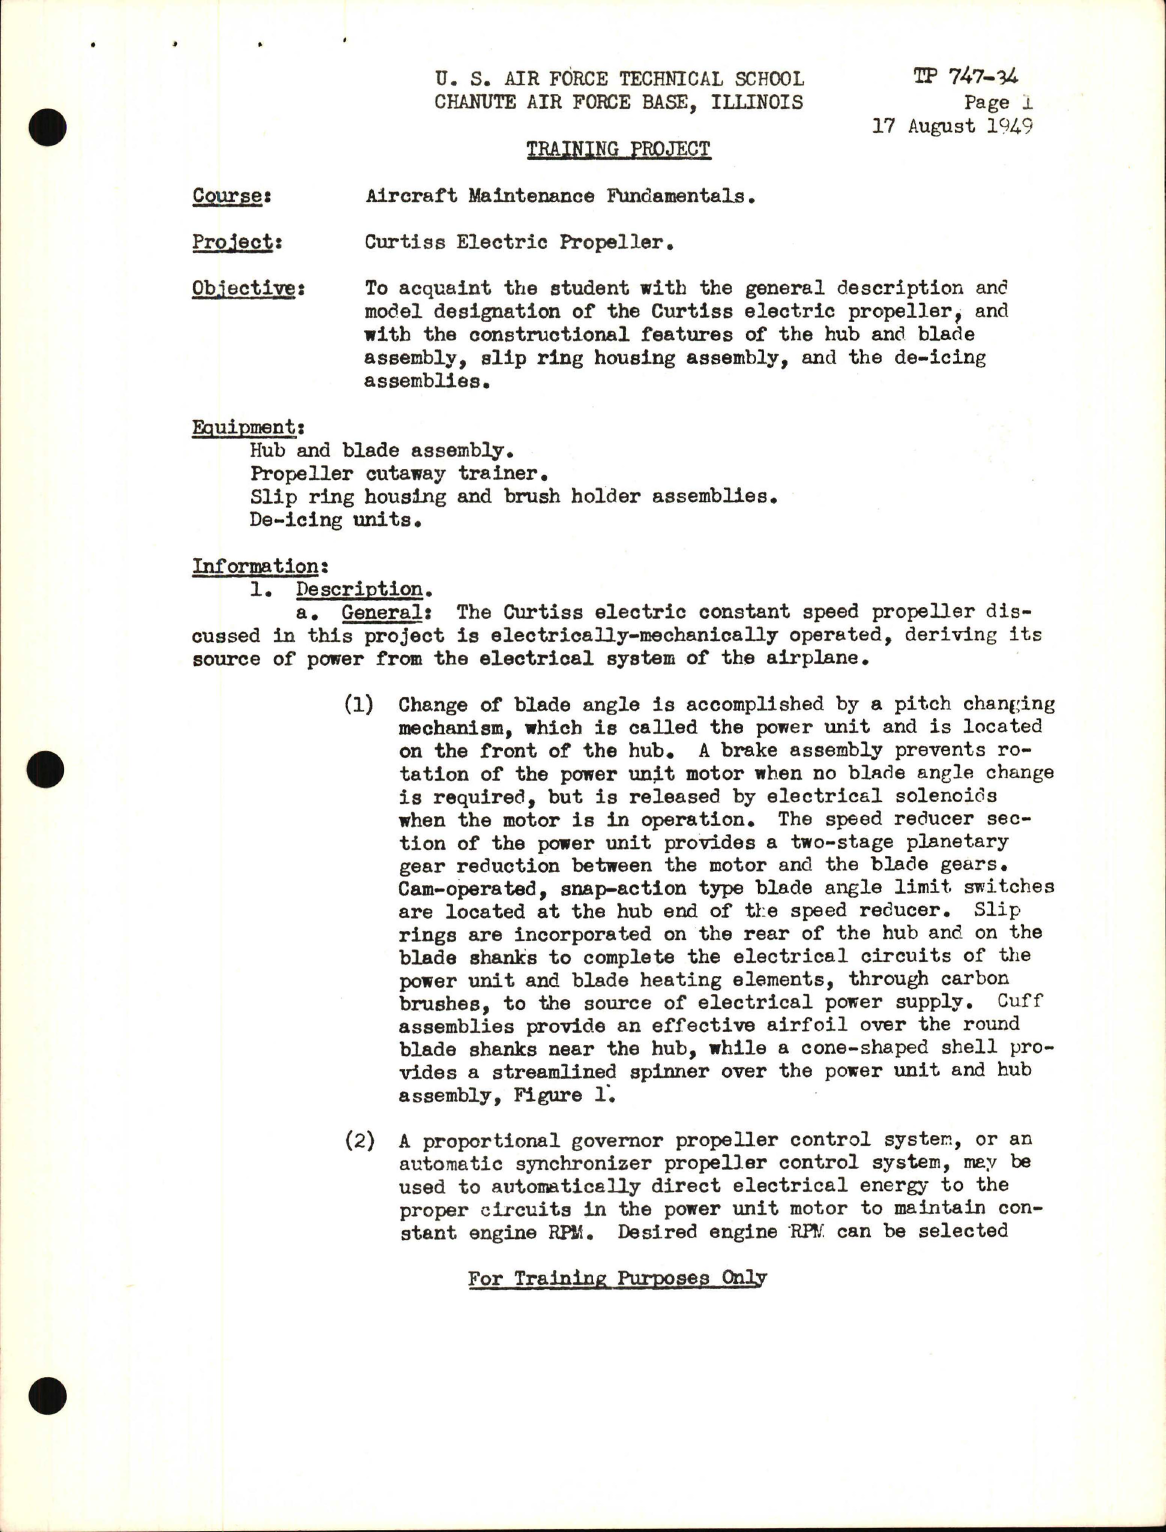 Sample page 1 from AirCorps Library document: Training Project, Curtiss Electric Propeller